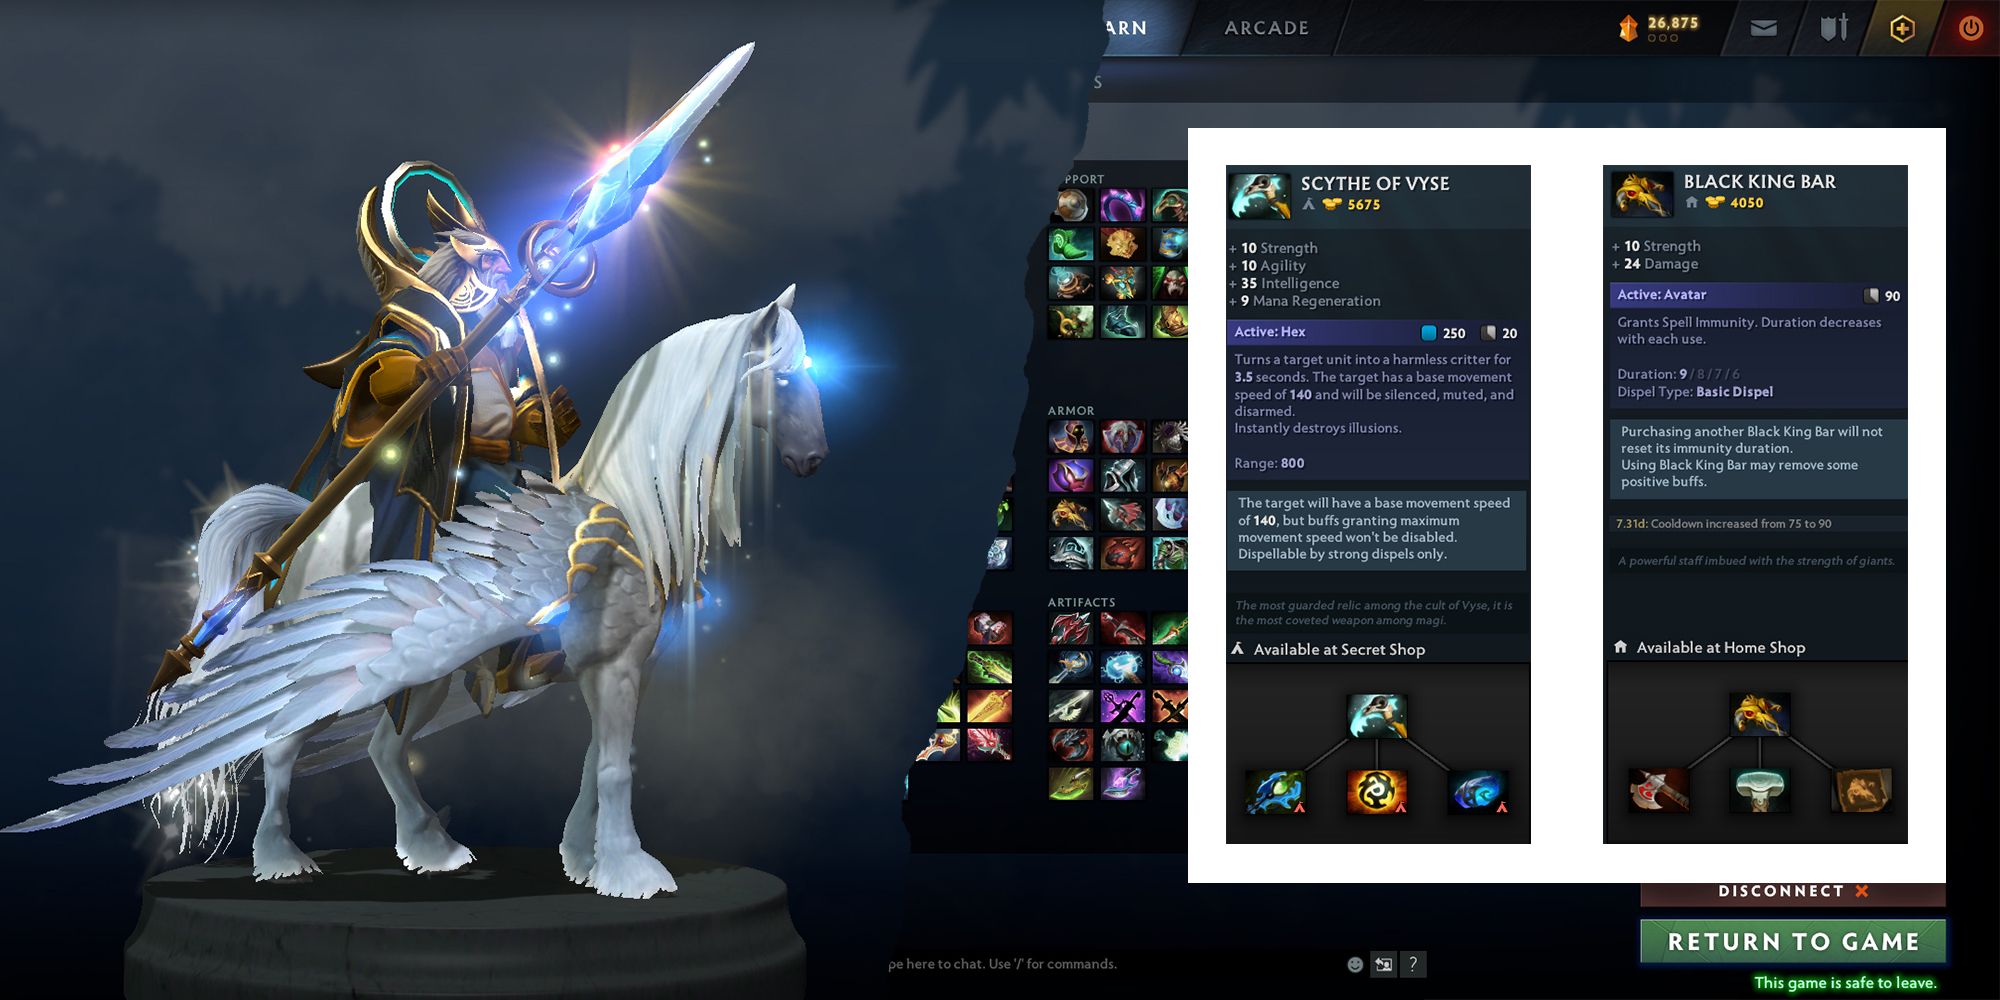 Dota 2: Keeper of the Light featuring Scythe of Vyse and Black King Bar